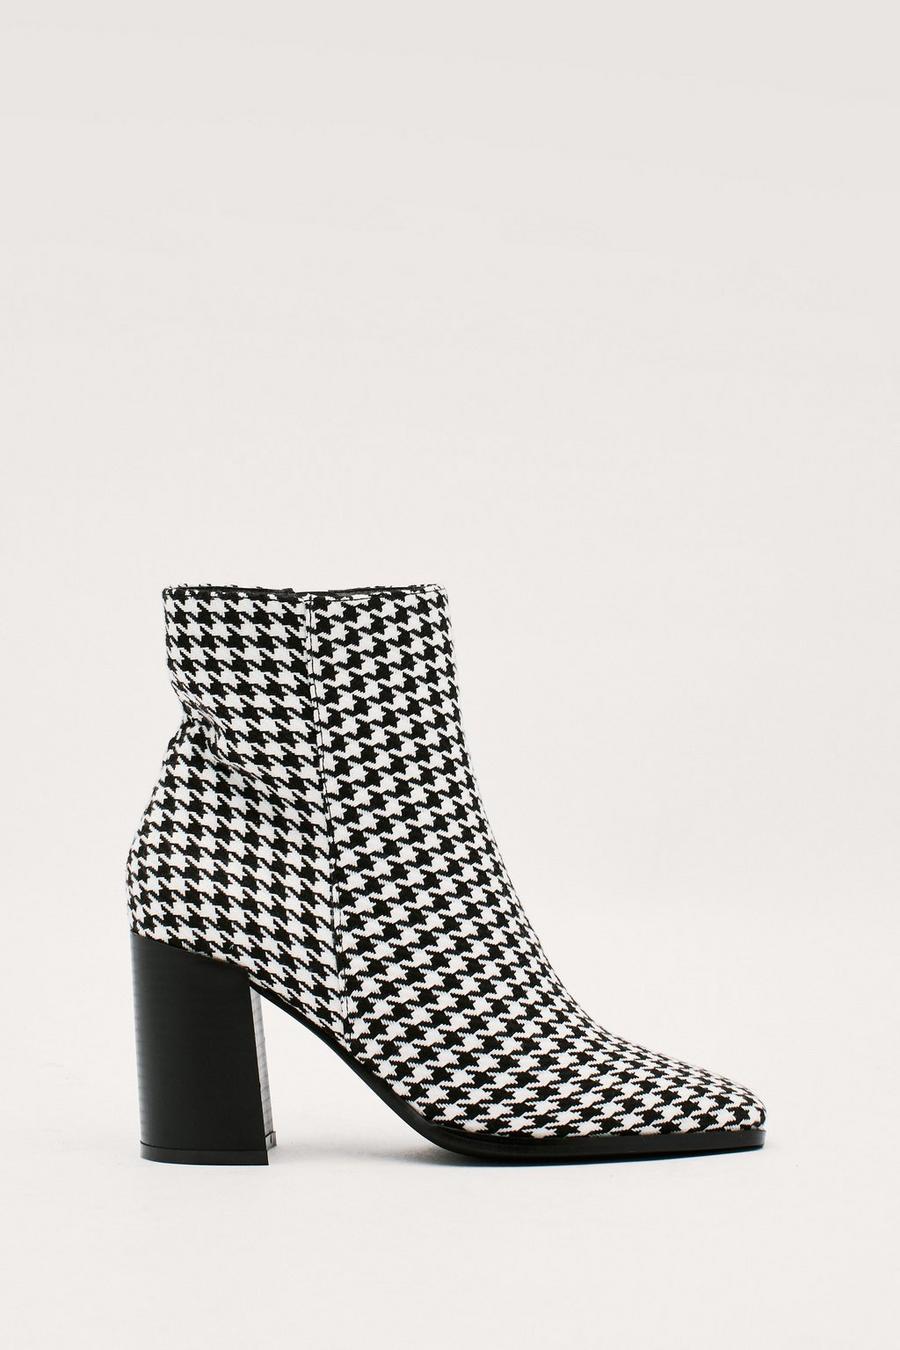 Houndstooth Square Toe Ankle Boots